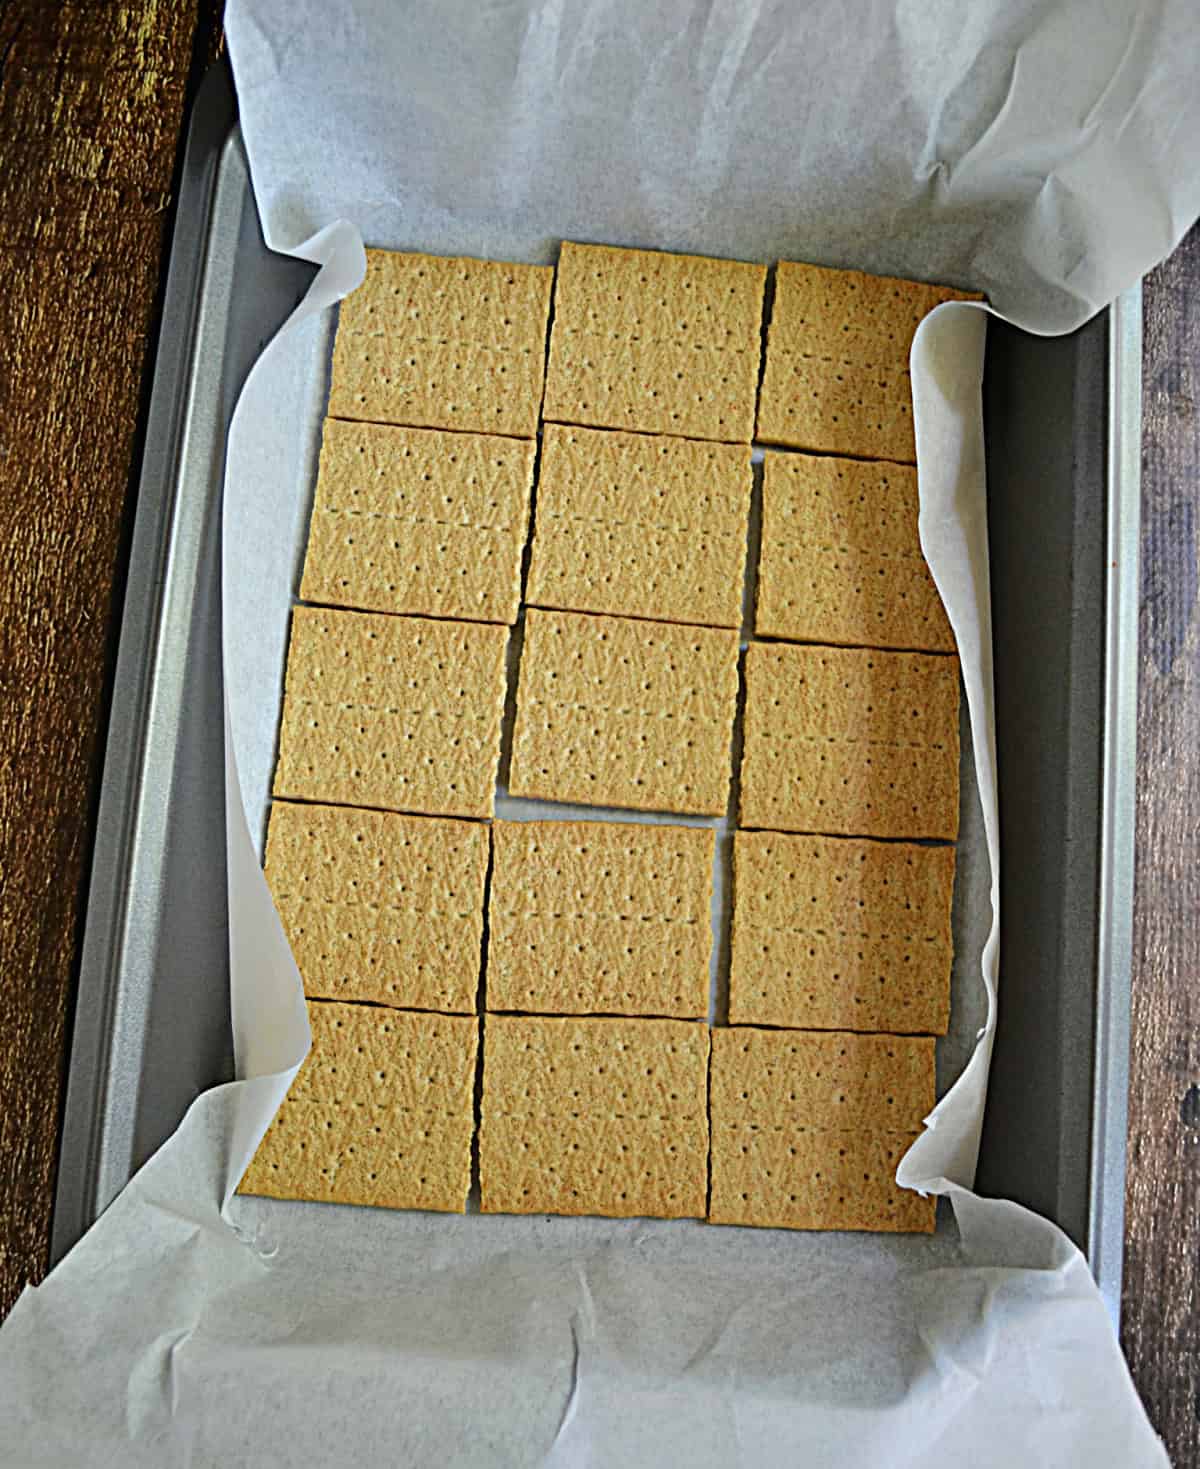 A pan with graham crackers in it.